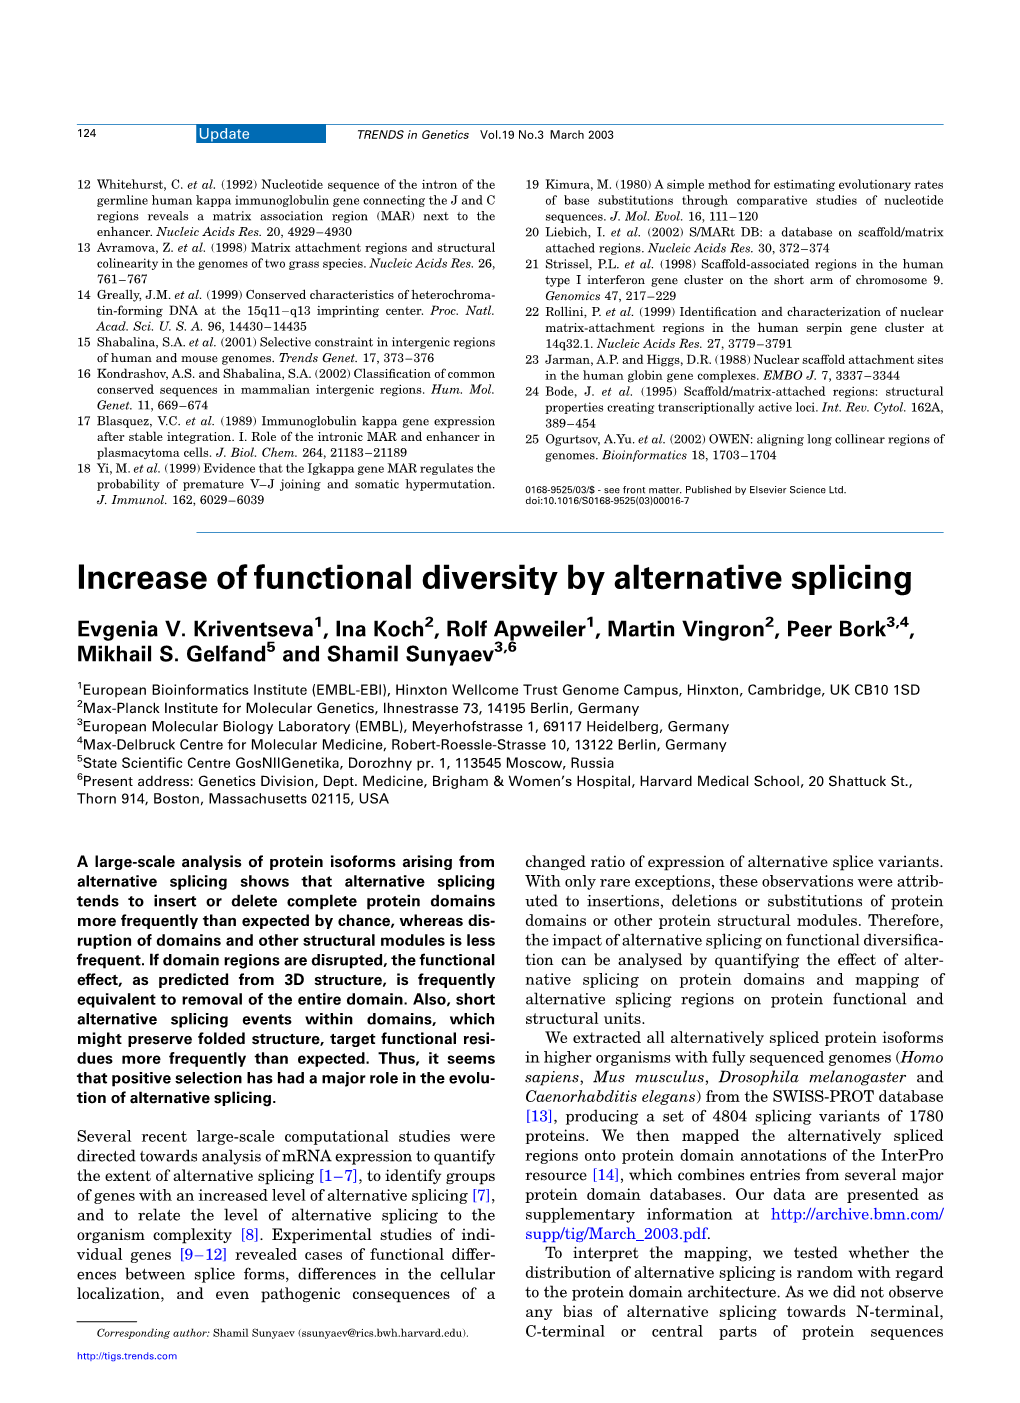 Increase of Functional Diversity by Alternative Splicing